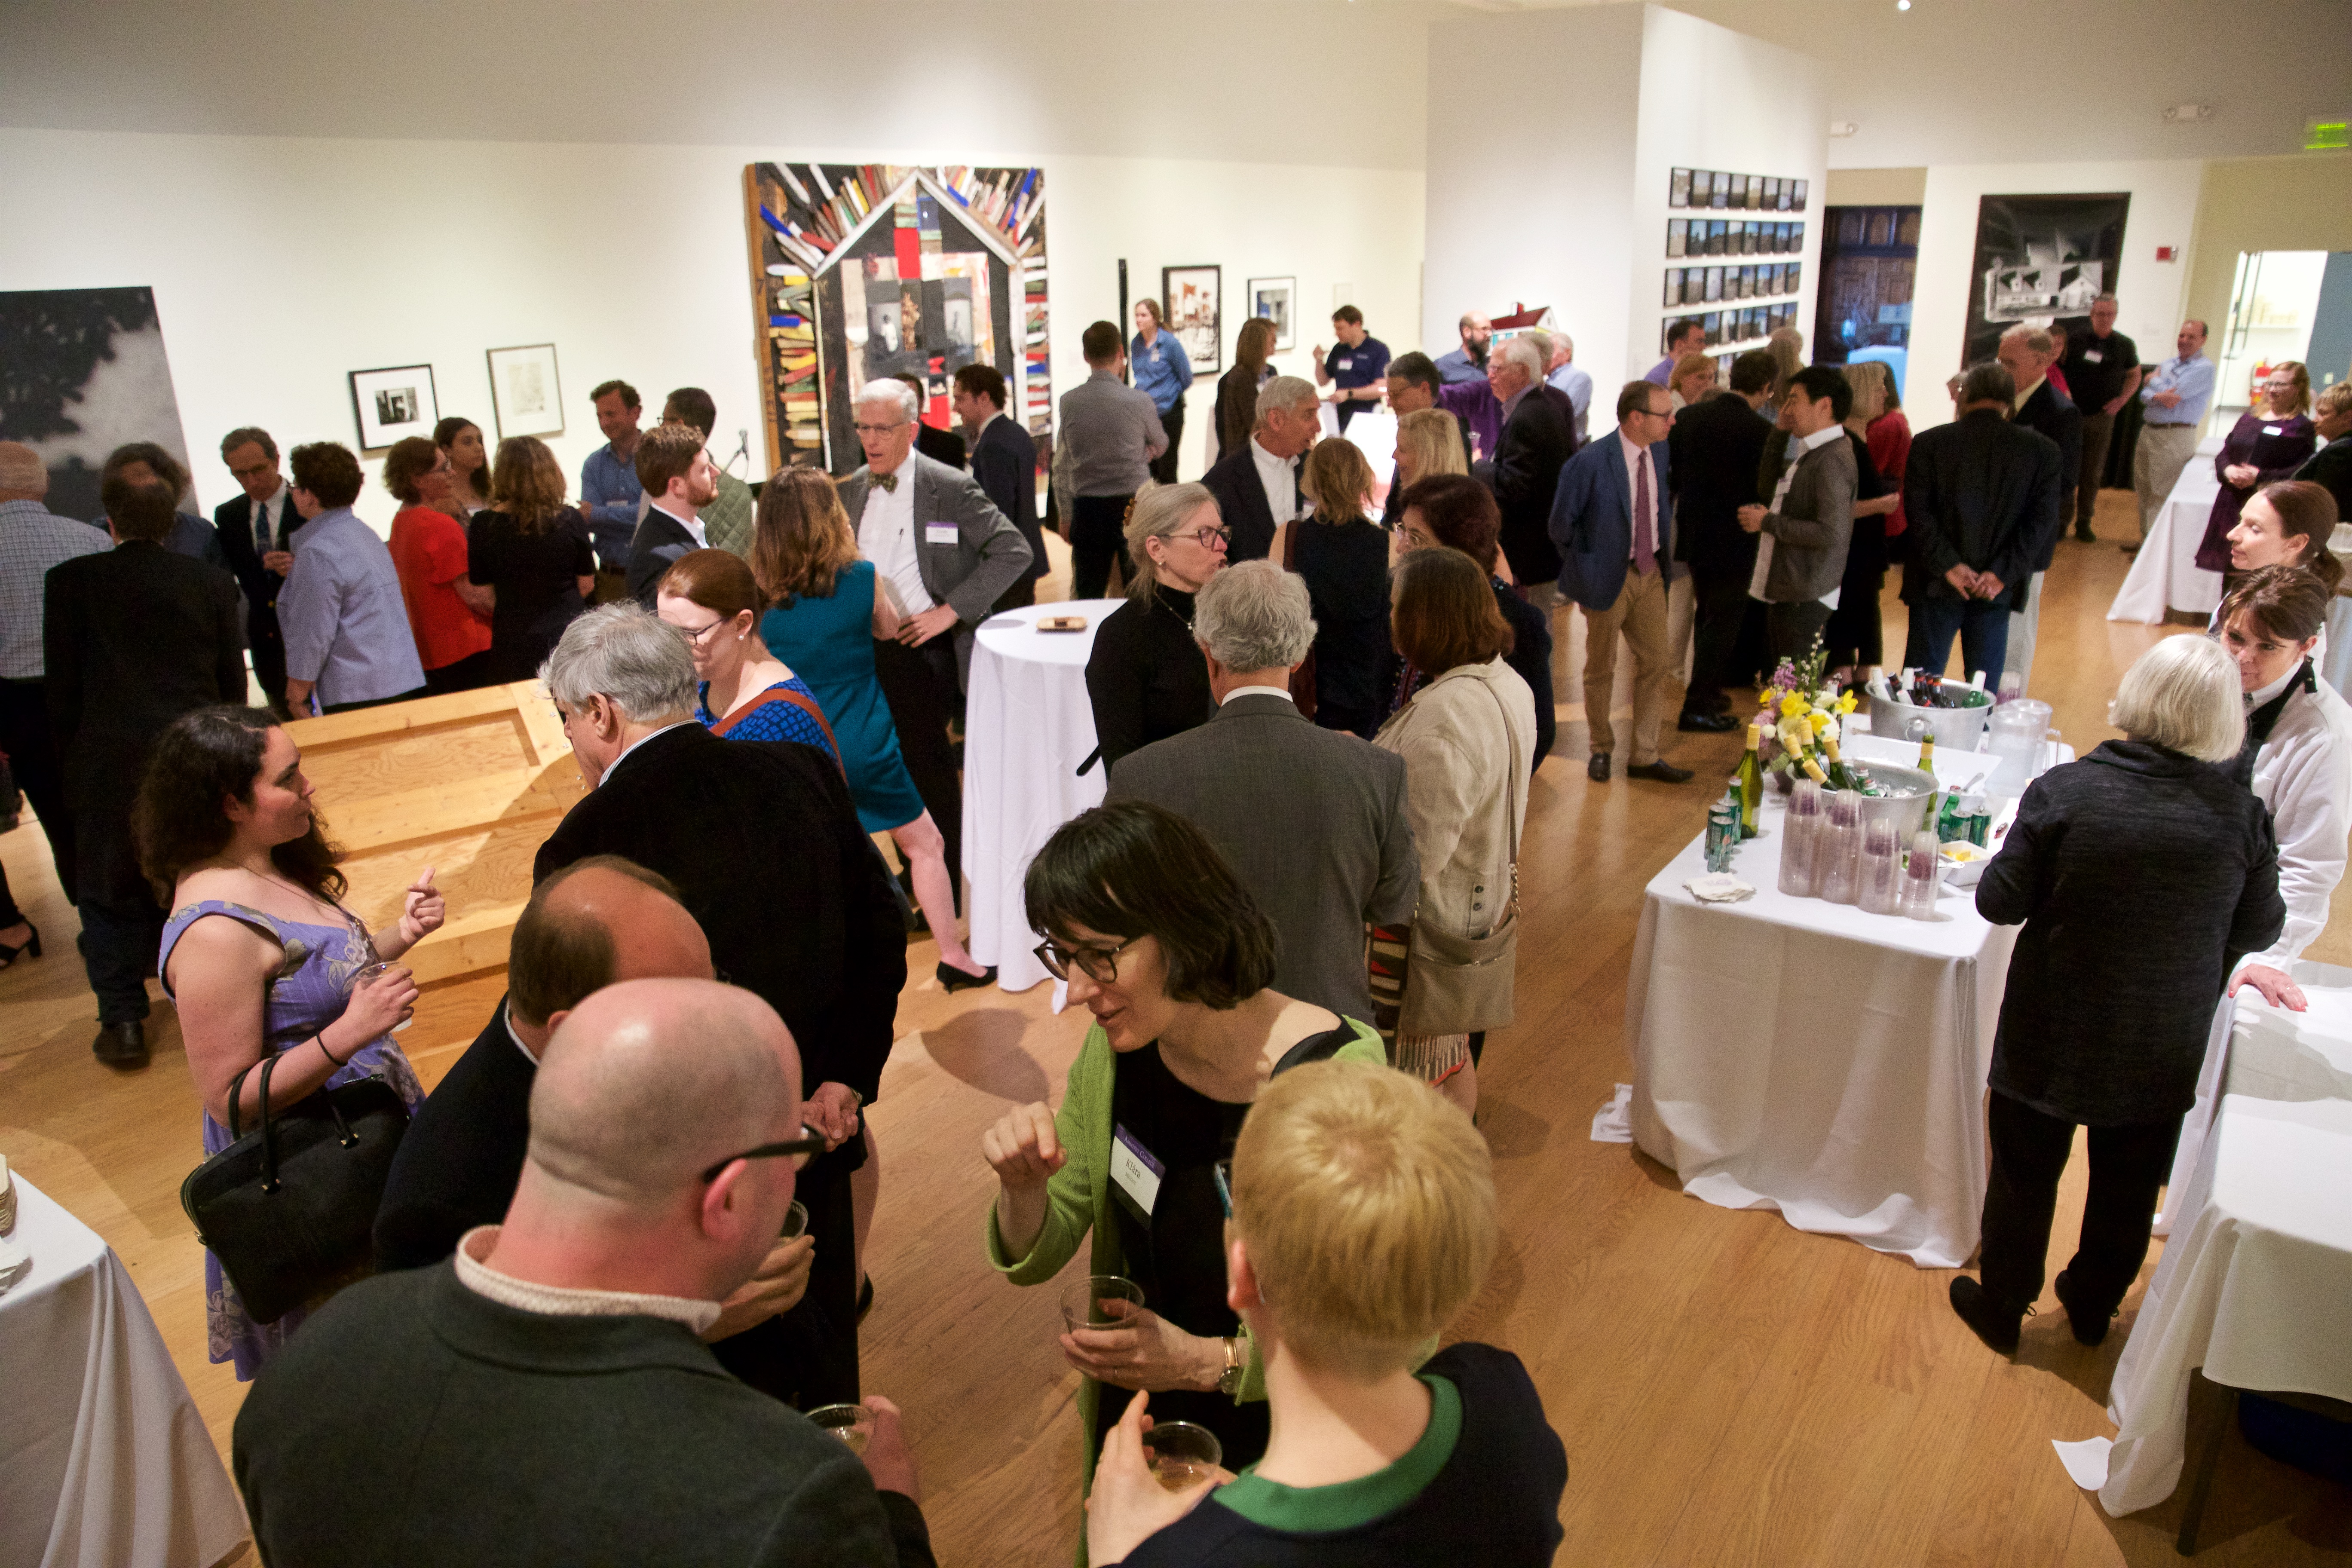 guests mingling in the Mead Art Museum at the campus event